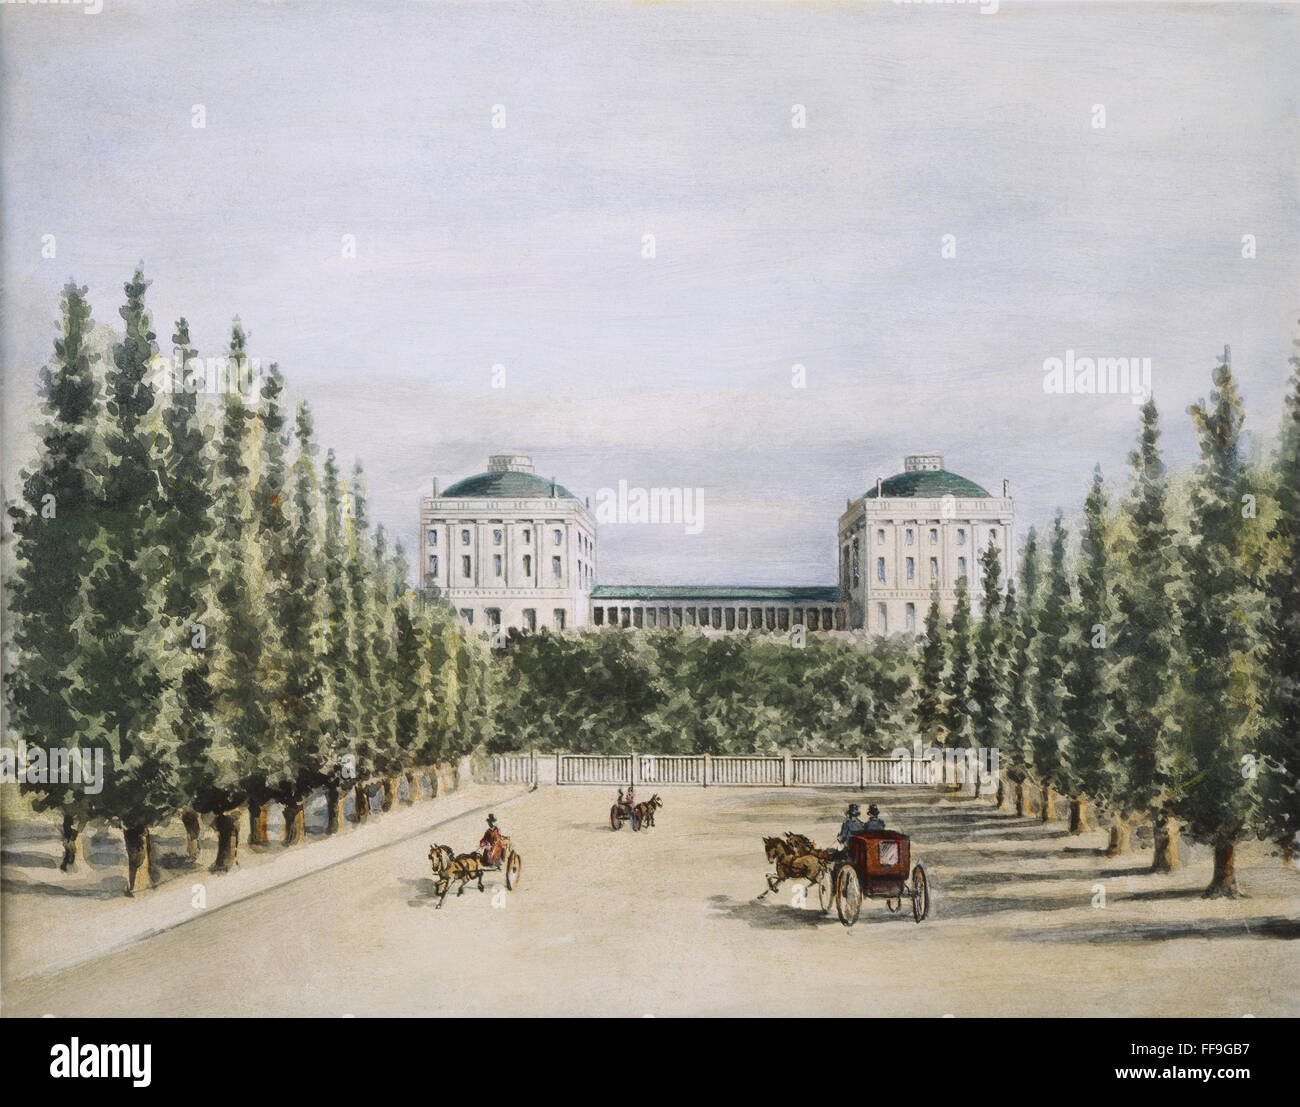 WASHINGTON, D.C.: CAPITOL. /nThe west front of the Capitol at Washington, D.C. with the Jefferson poplars: watercolor, before 1814, attributed to Benjamin Henry Latrobe. Stock Photo